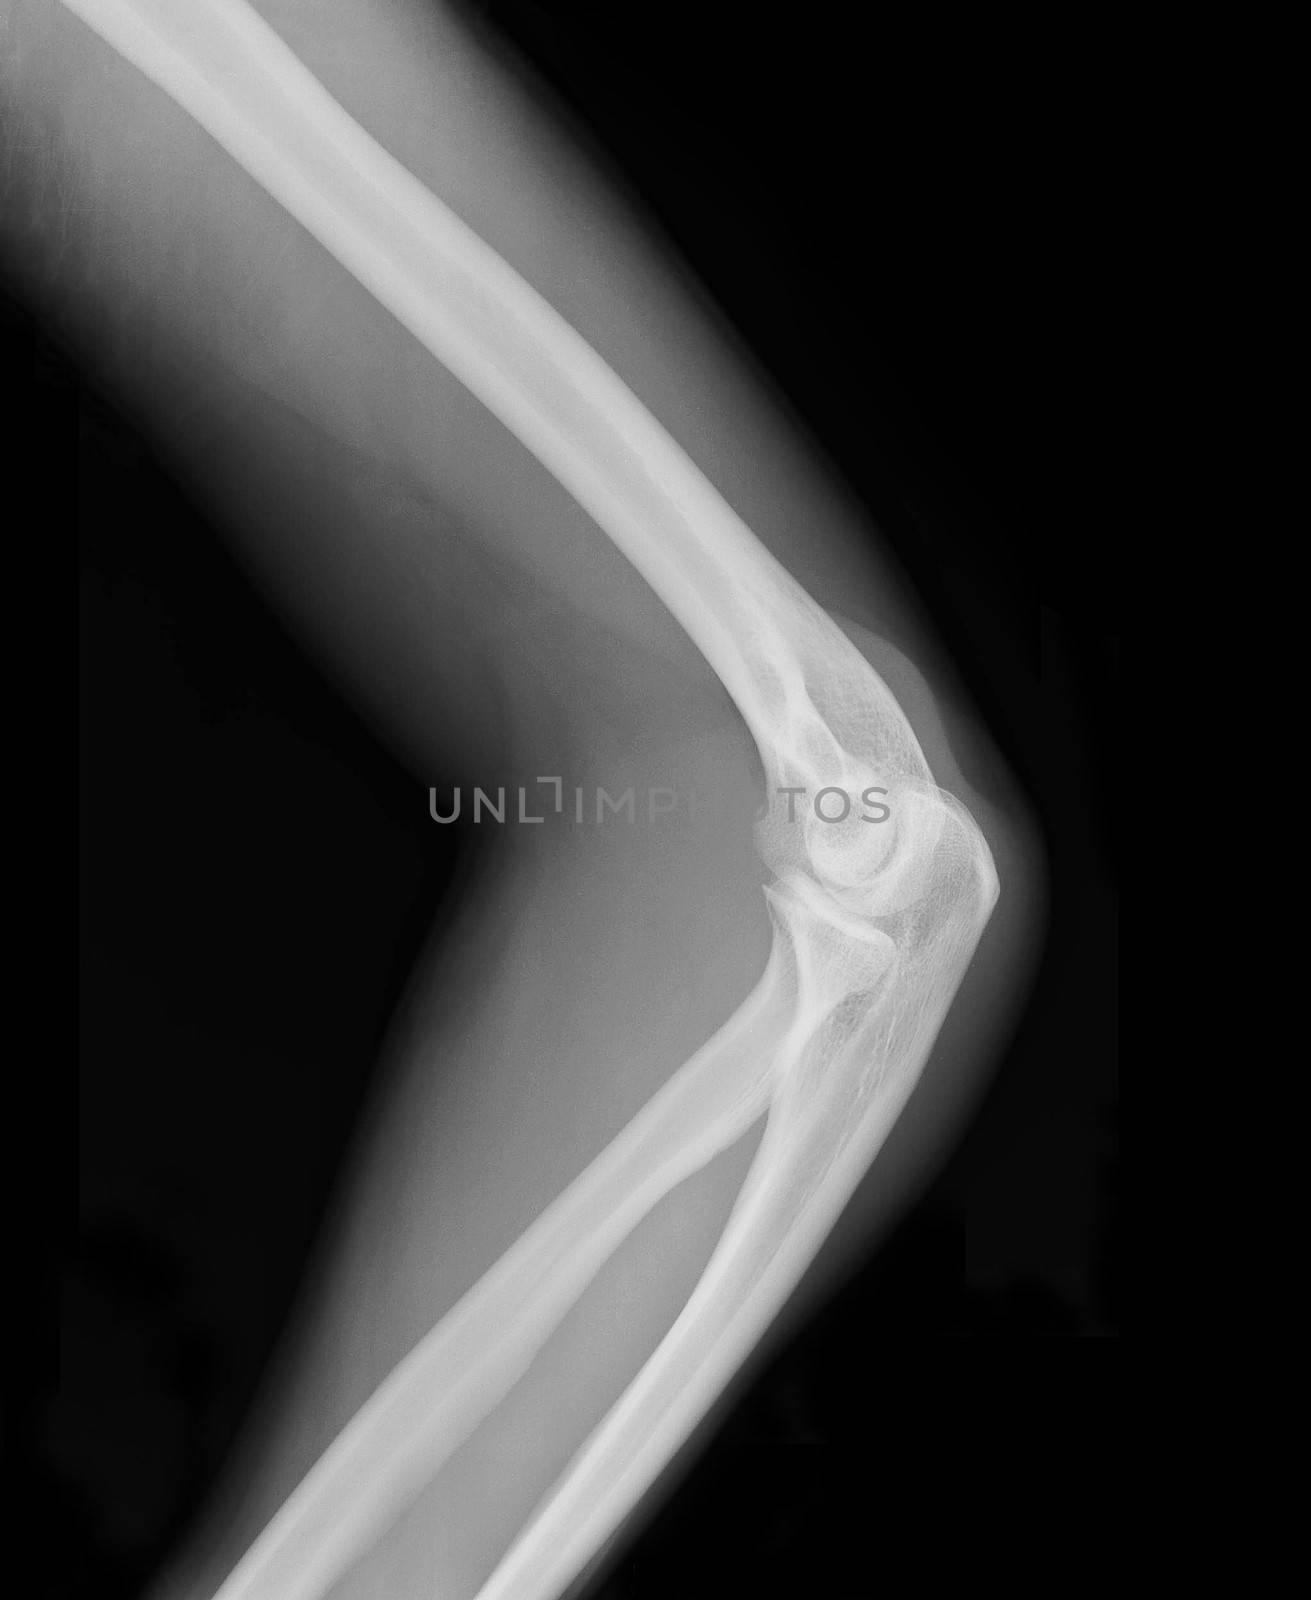 xray of an arm with elbow joint visible